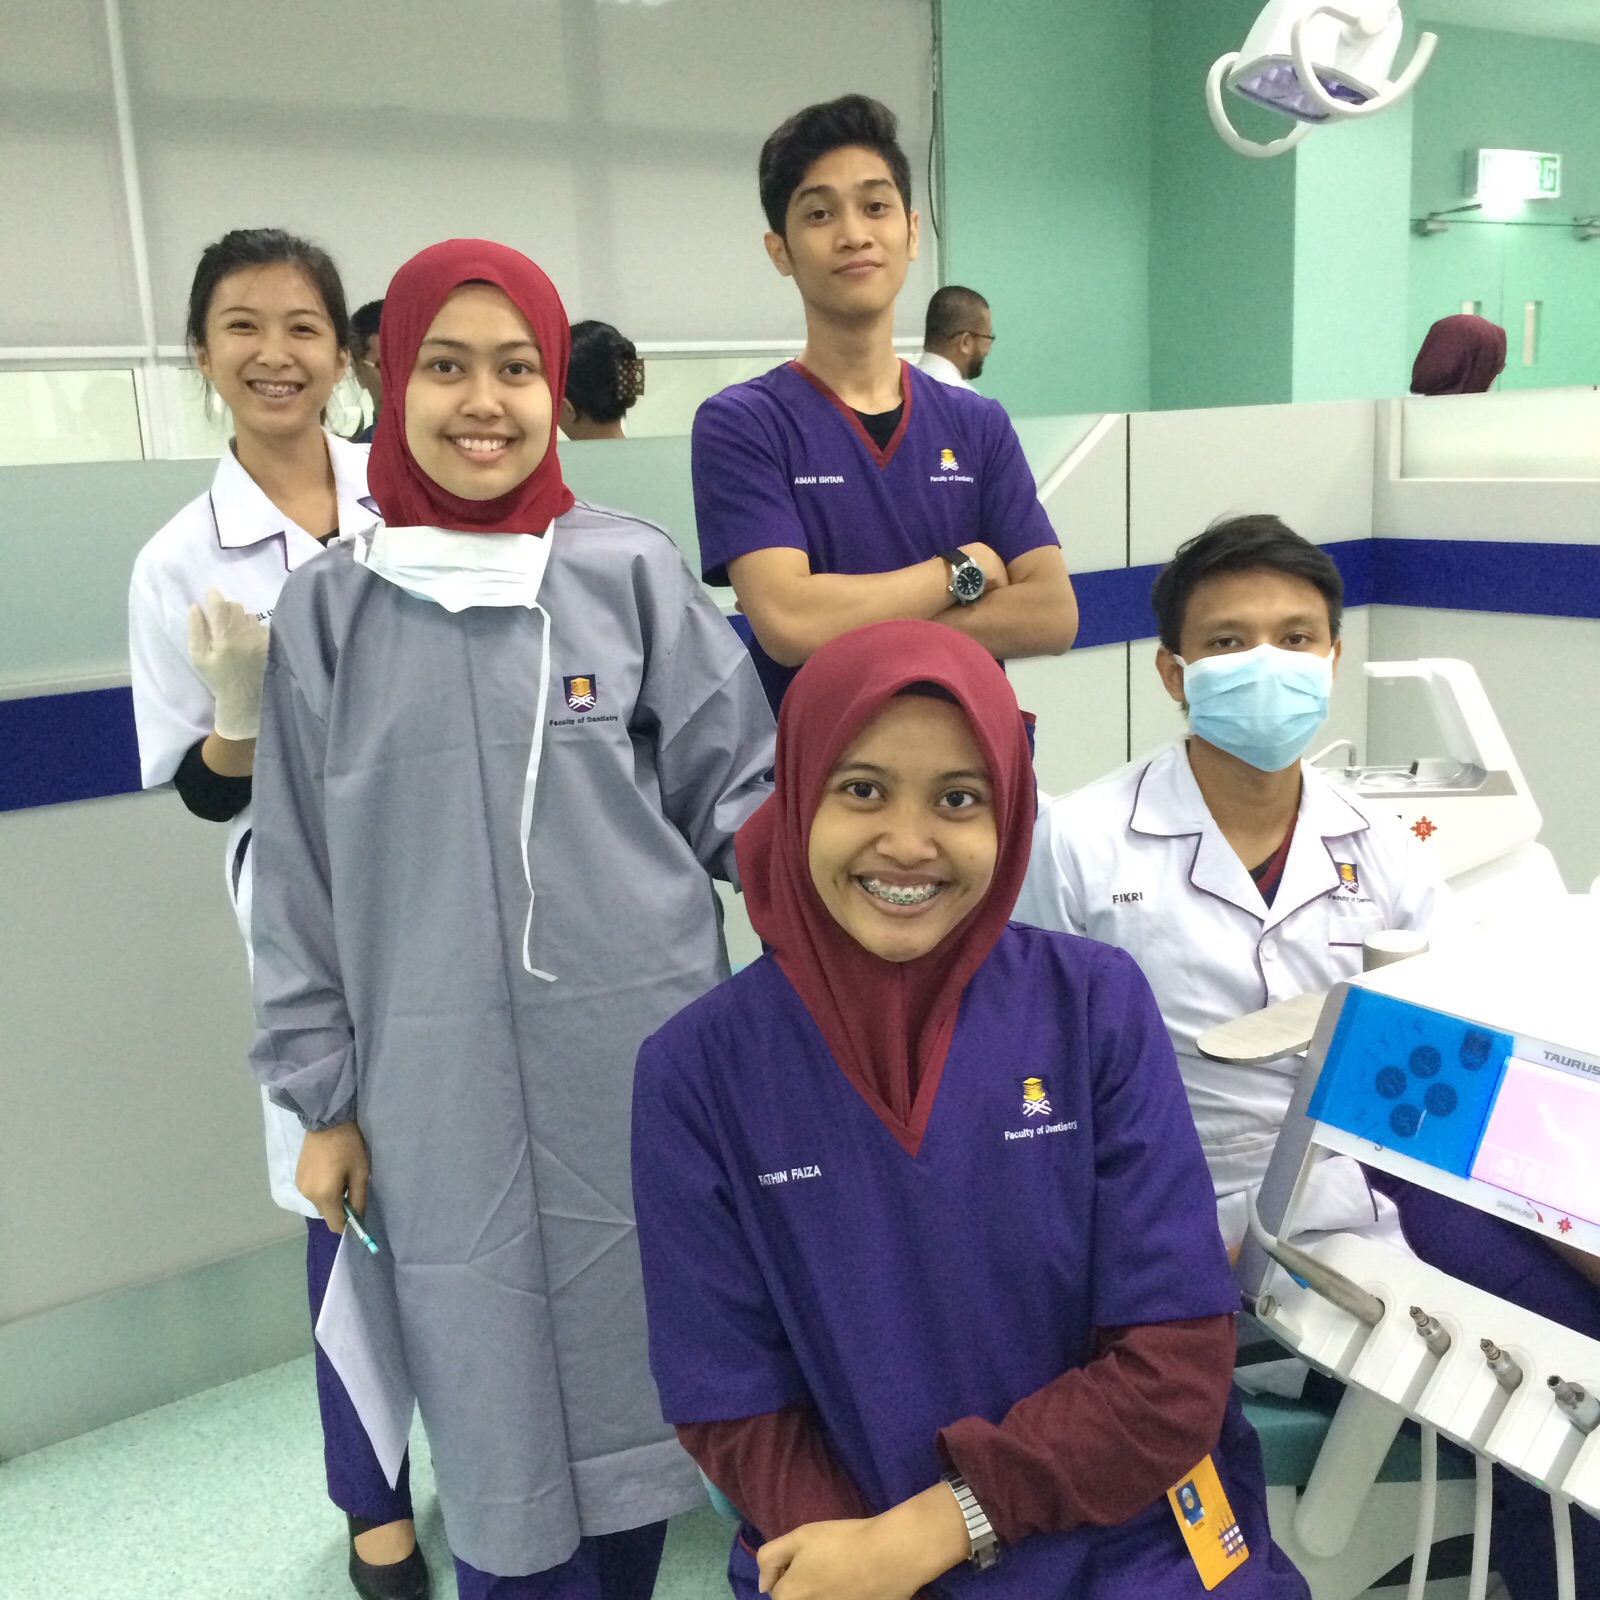 Faculty Of Dentistry Uitm / Compend Oral Sci : In the same year, the